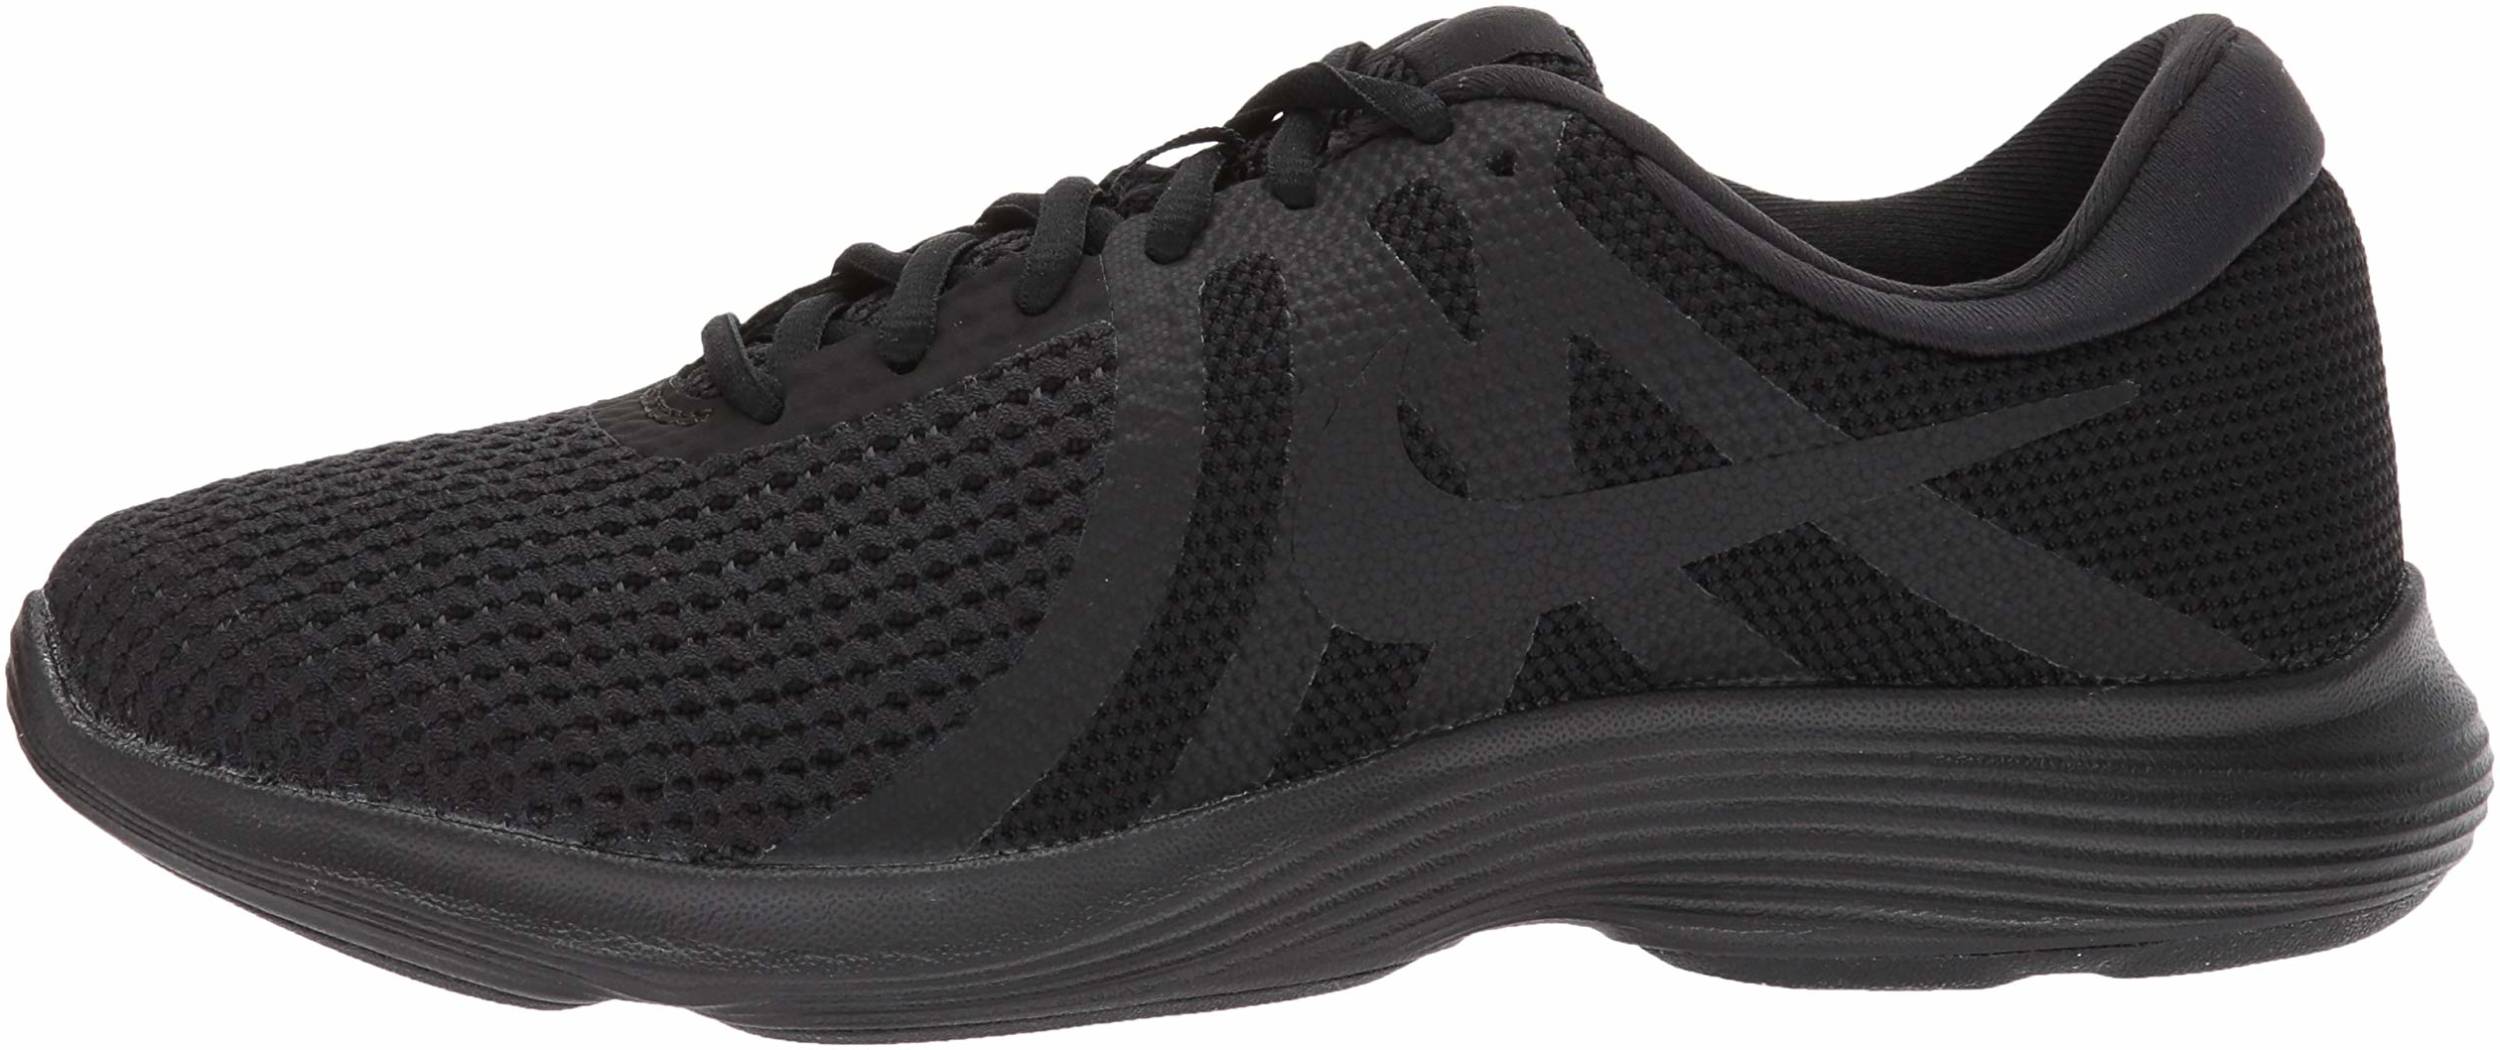 Only $42 + Review of Nike Revolution 4 